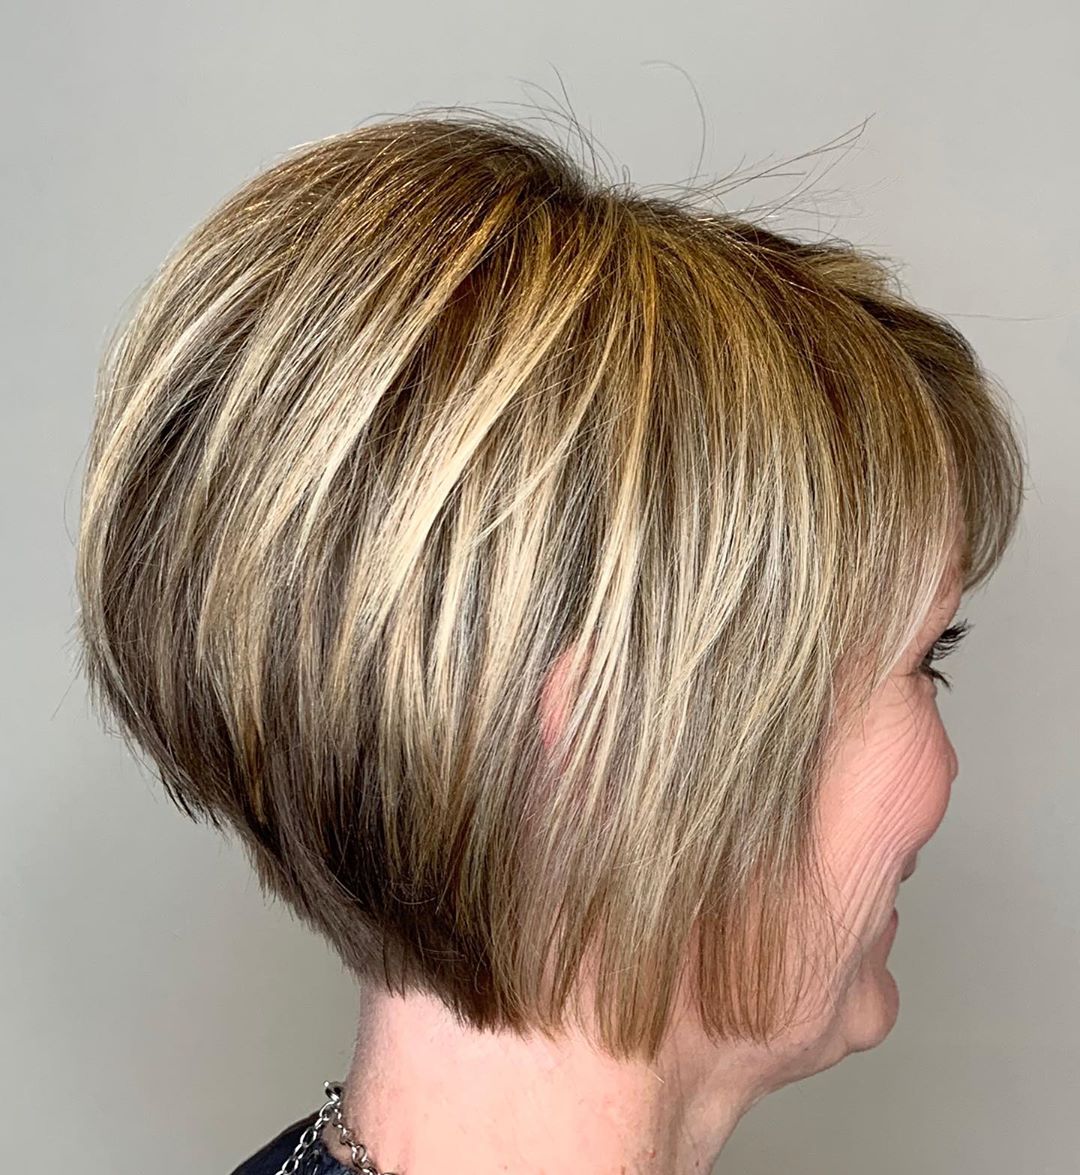 Jaw-Length Wedge Cut with Blonde Highlights